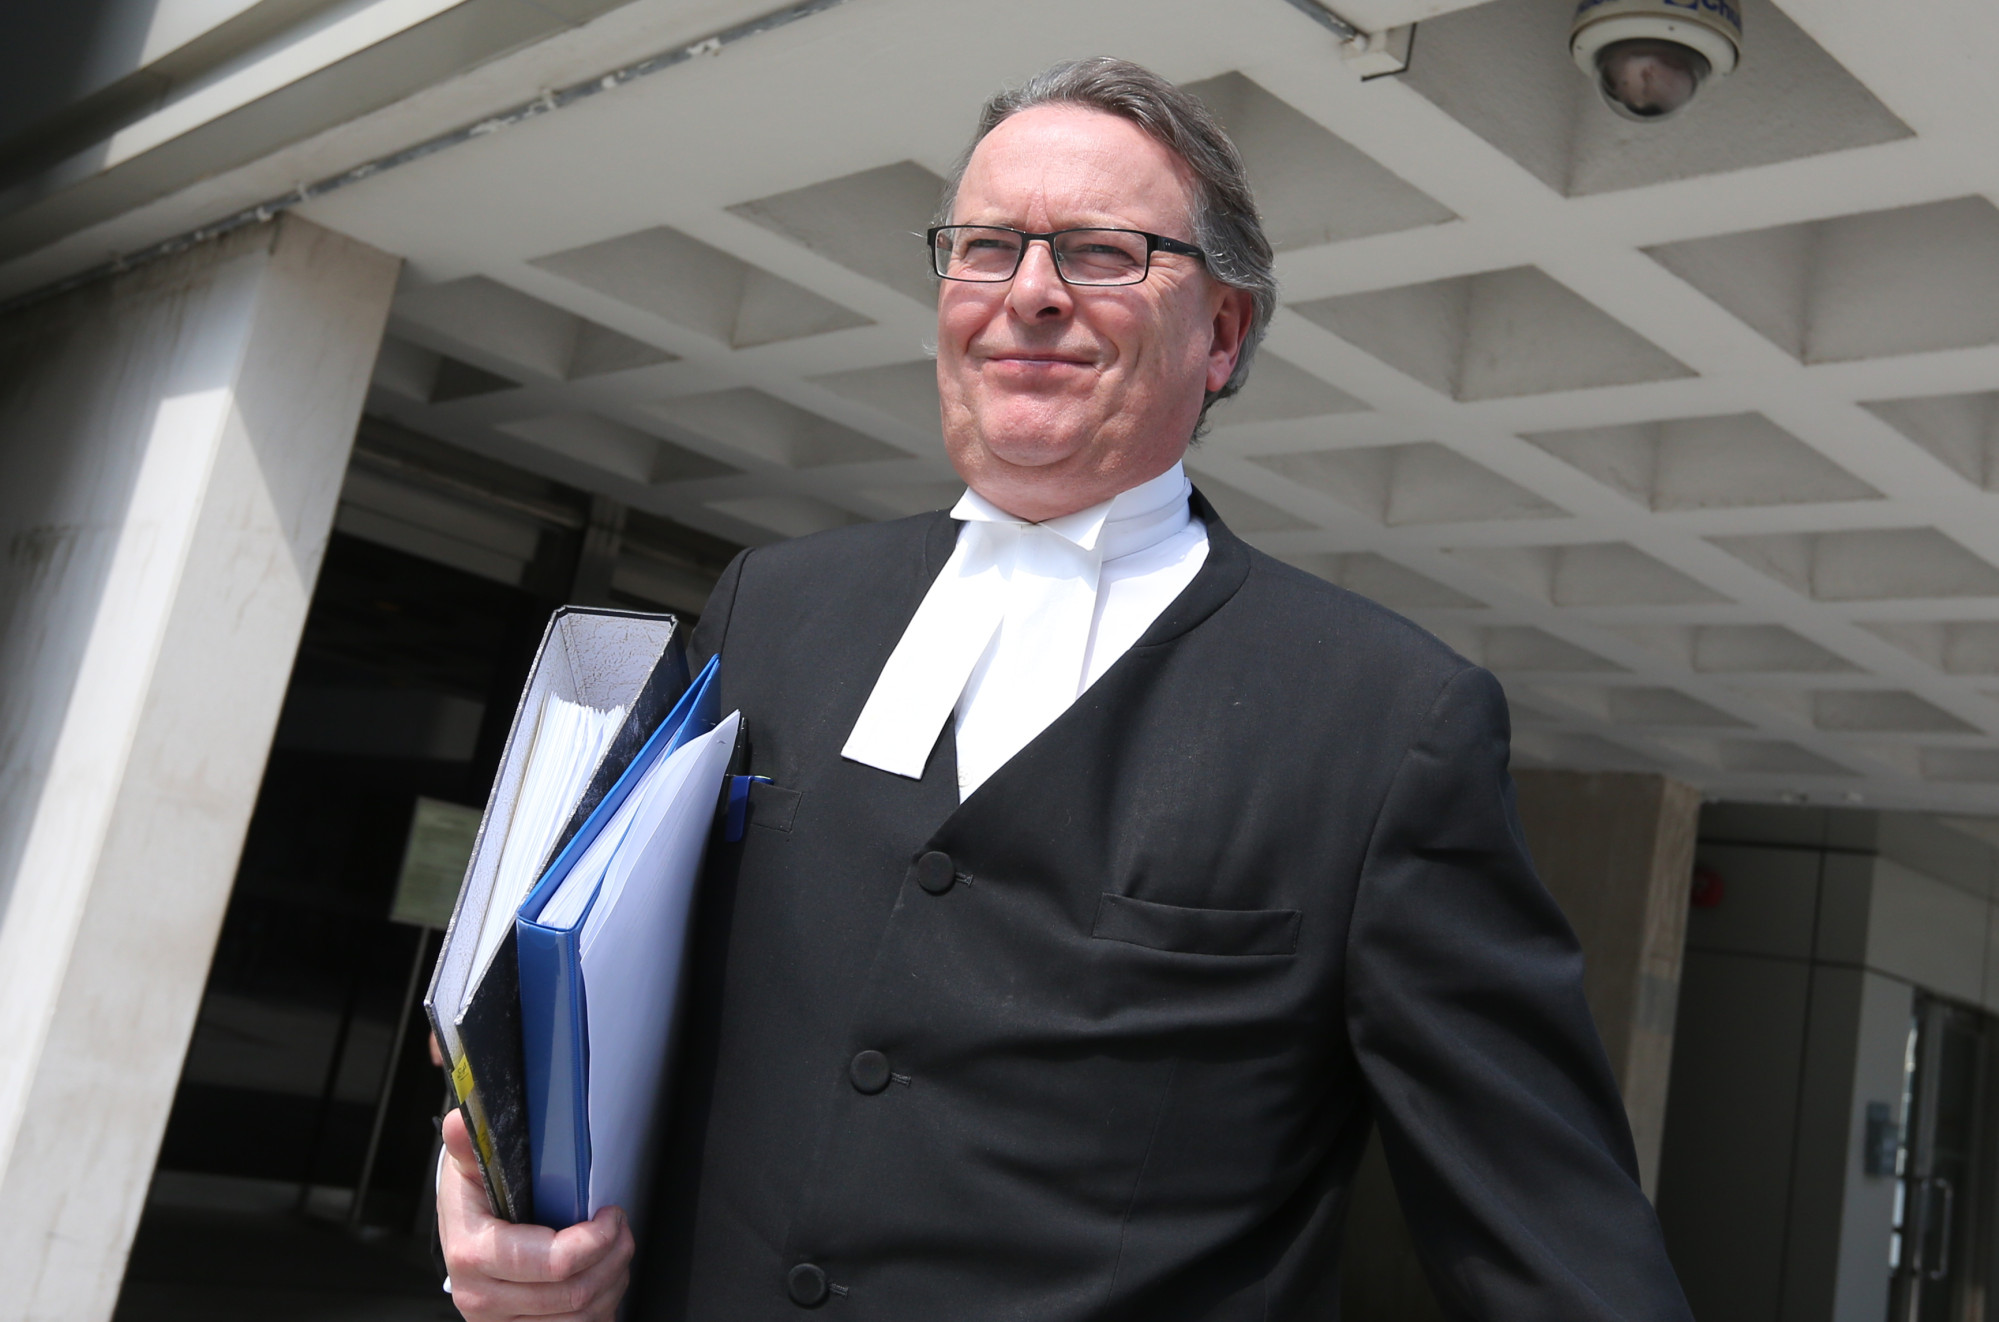 English barrister Tim Owen KC in Hong Kong when he defended city-based former banker Rurik Jutting, who was convicted in 2016 of the brutal murder of two women. Photo: Dickson Lee